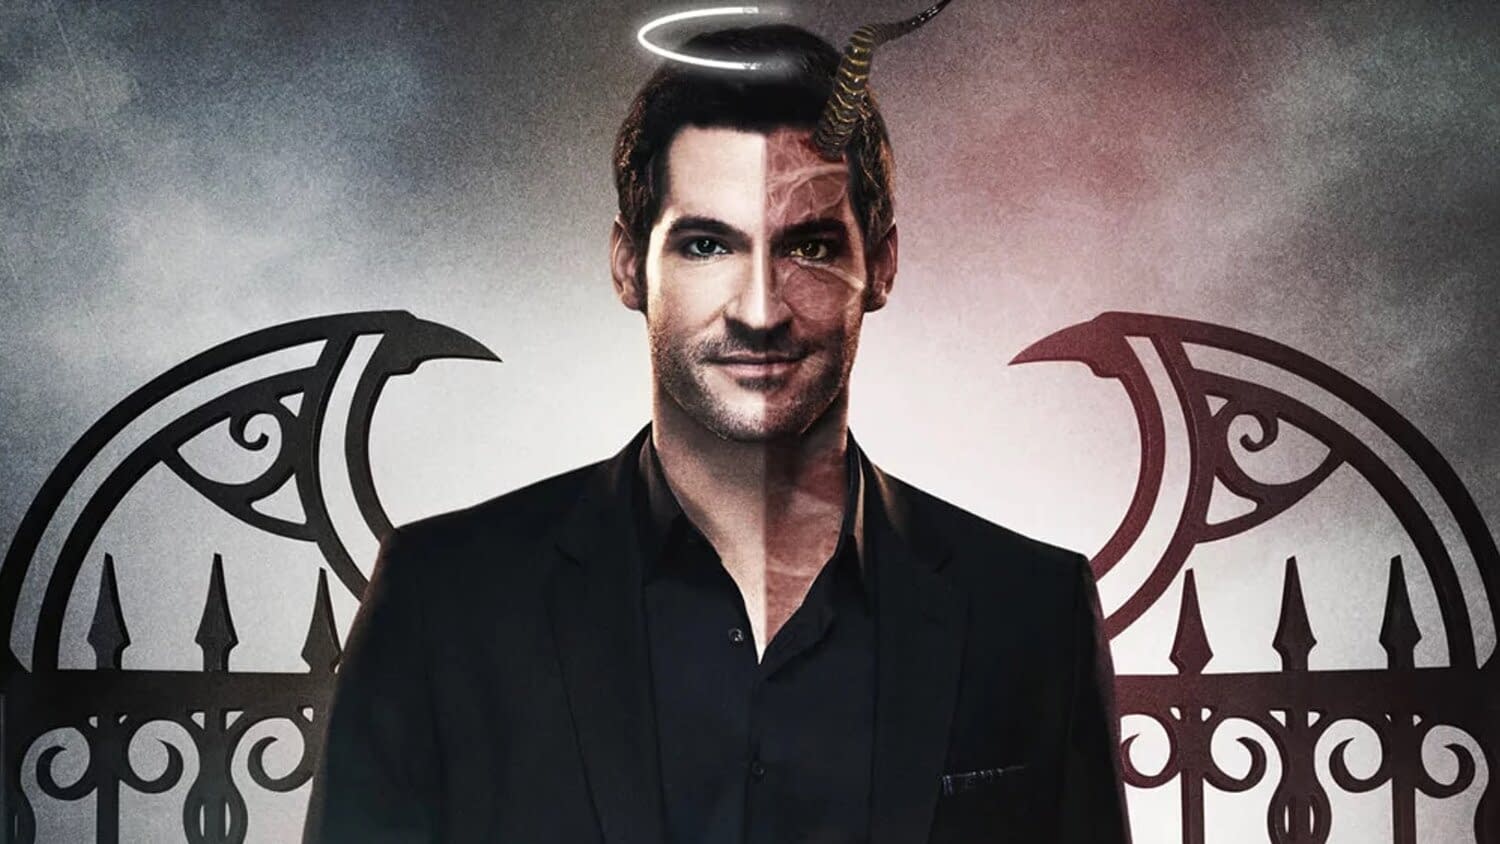 Lucifer Season 5 Confirms August Premiere With Some Sexy Moments